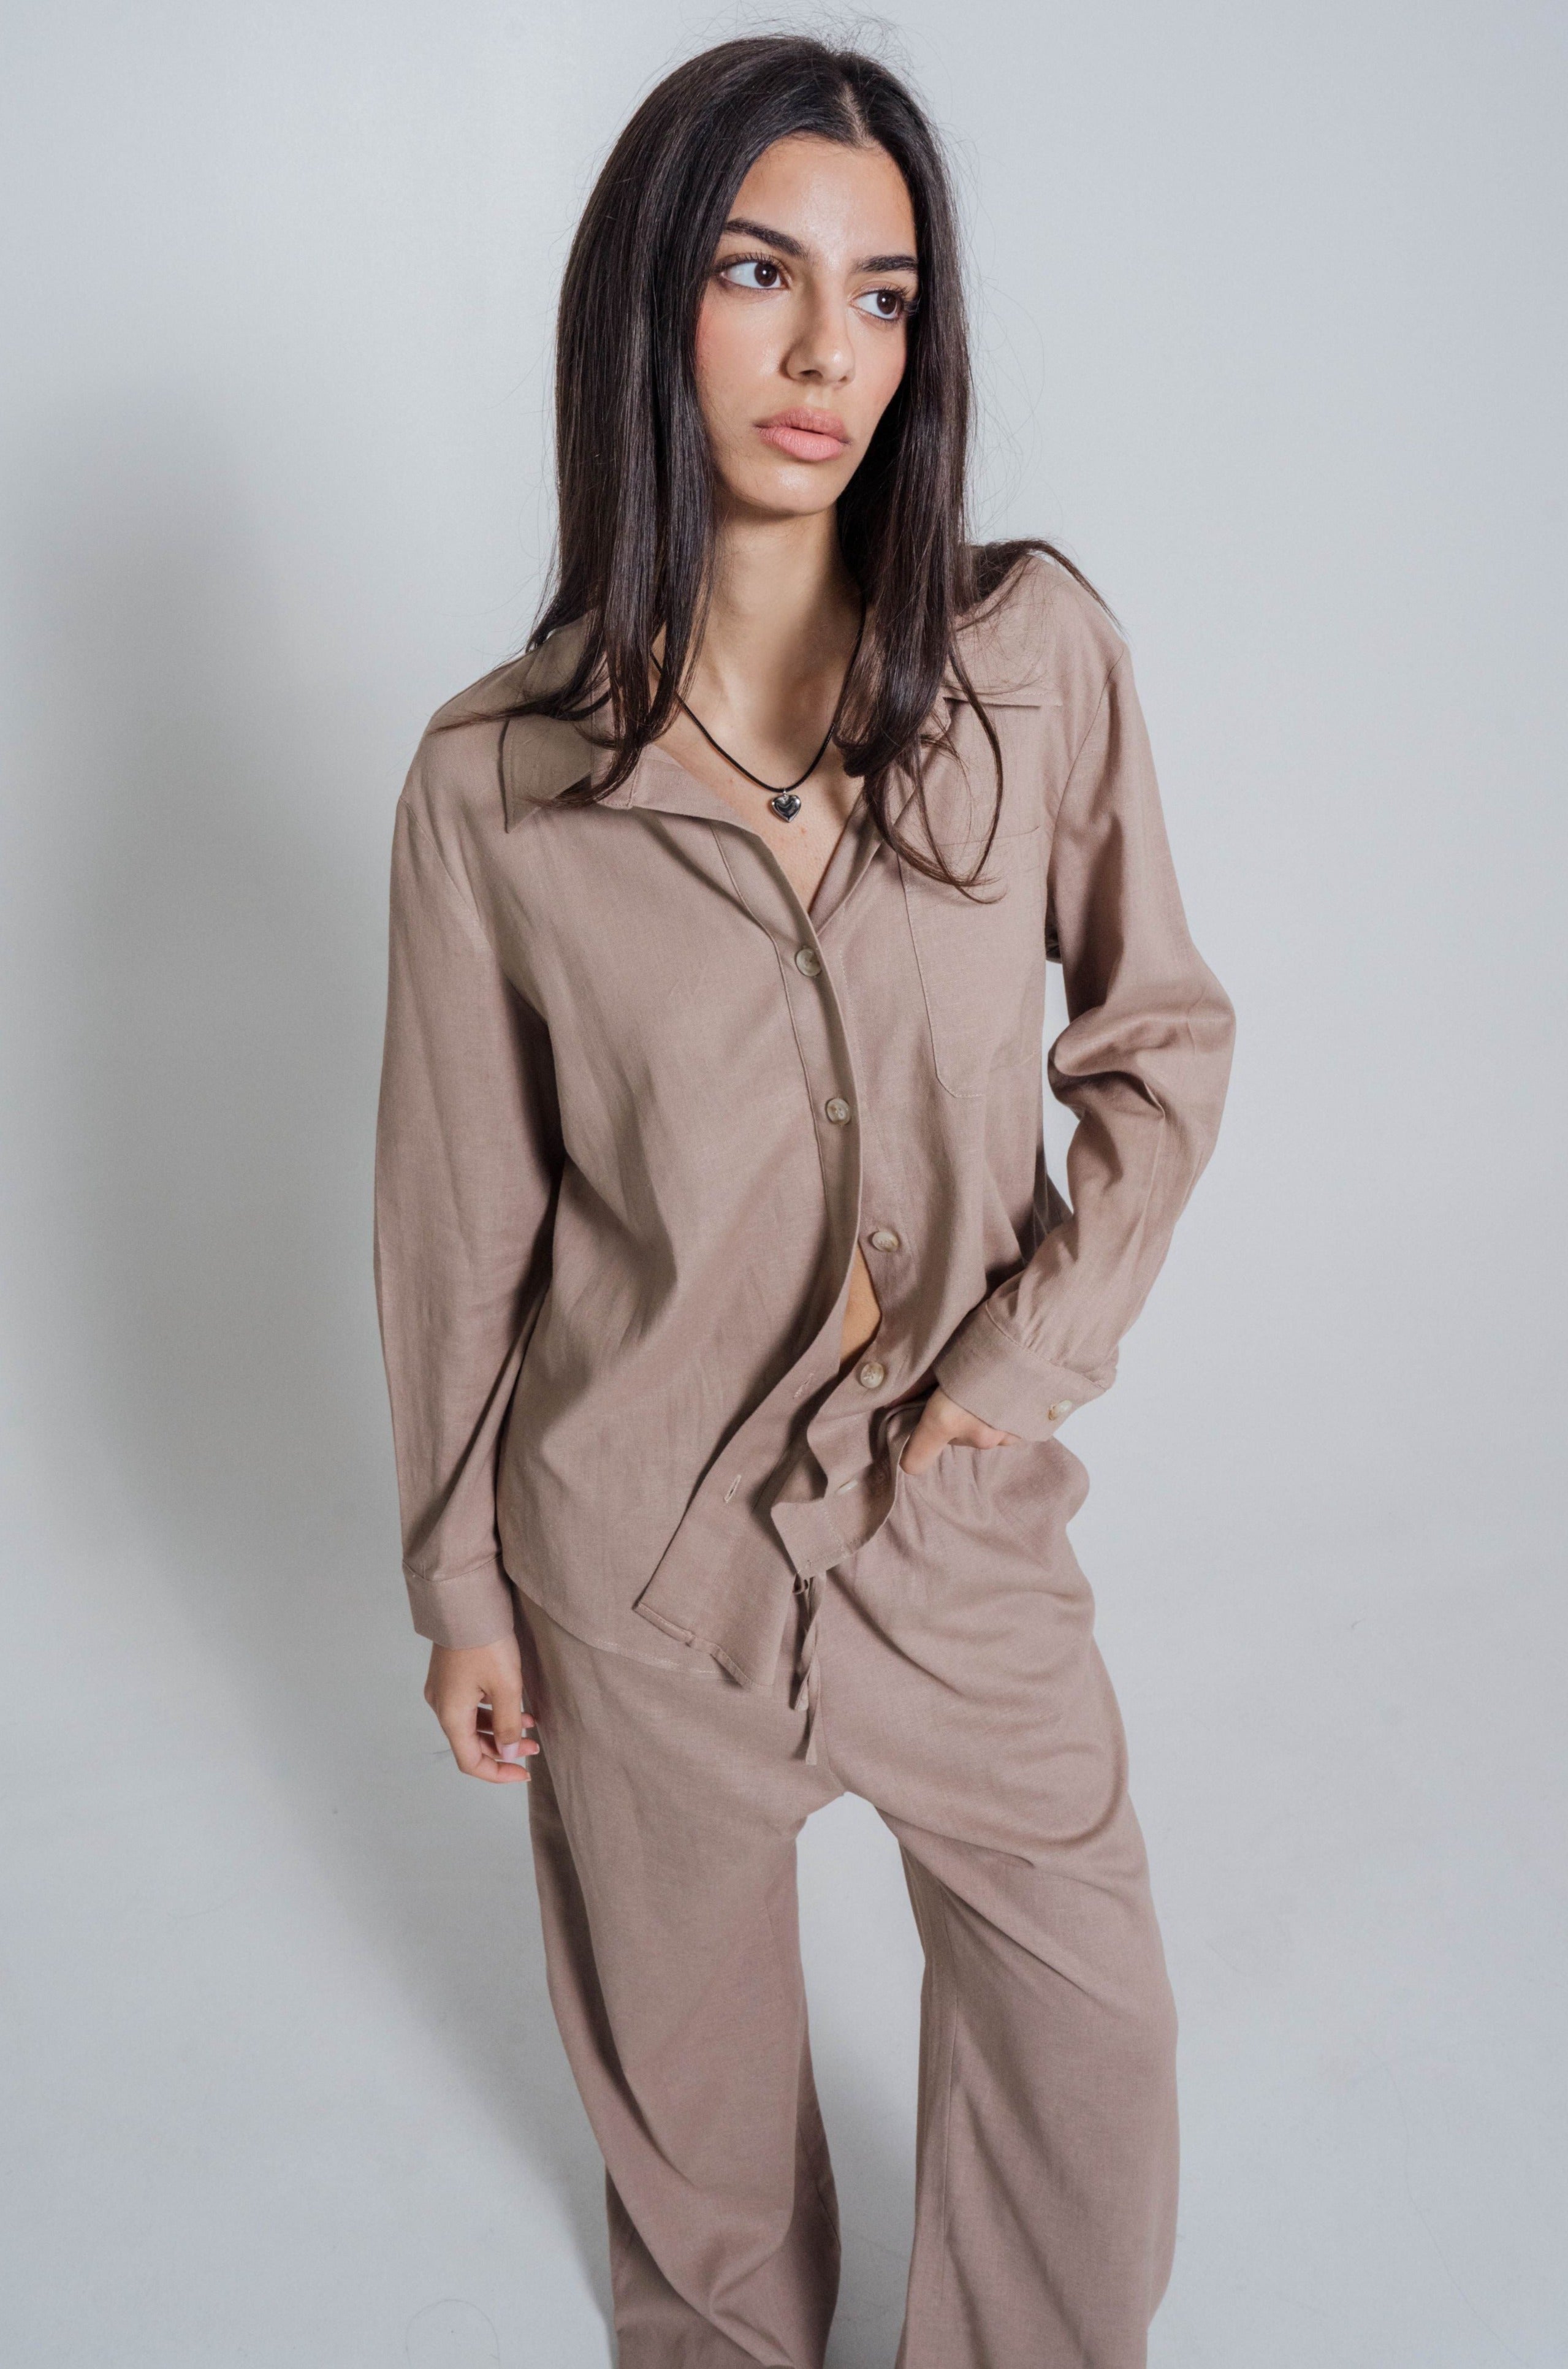 Wildflo StudioThe Linen Shirt in Taupe at Style Society set